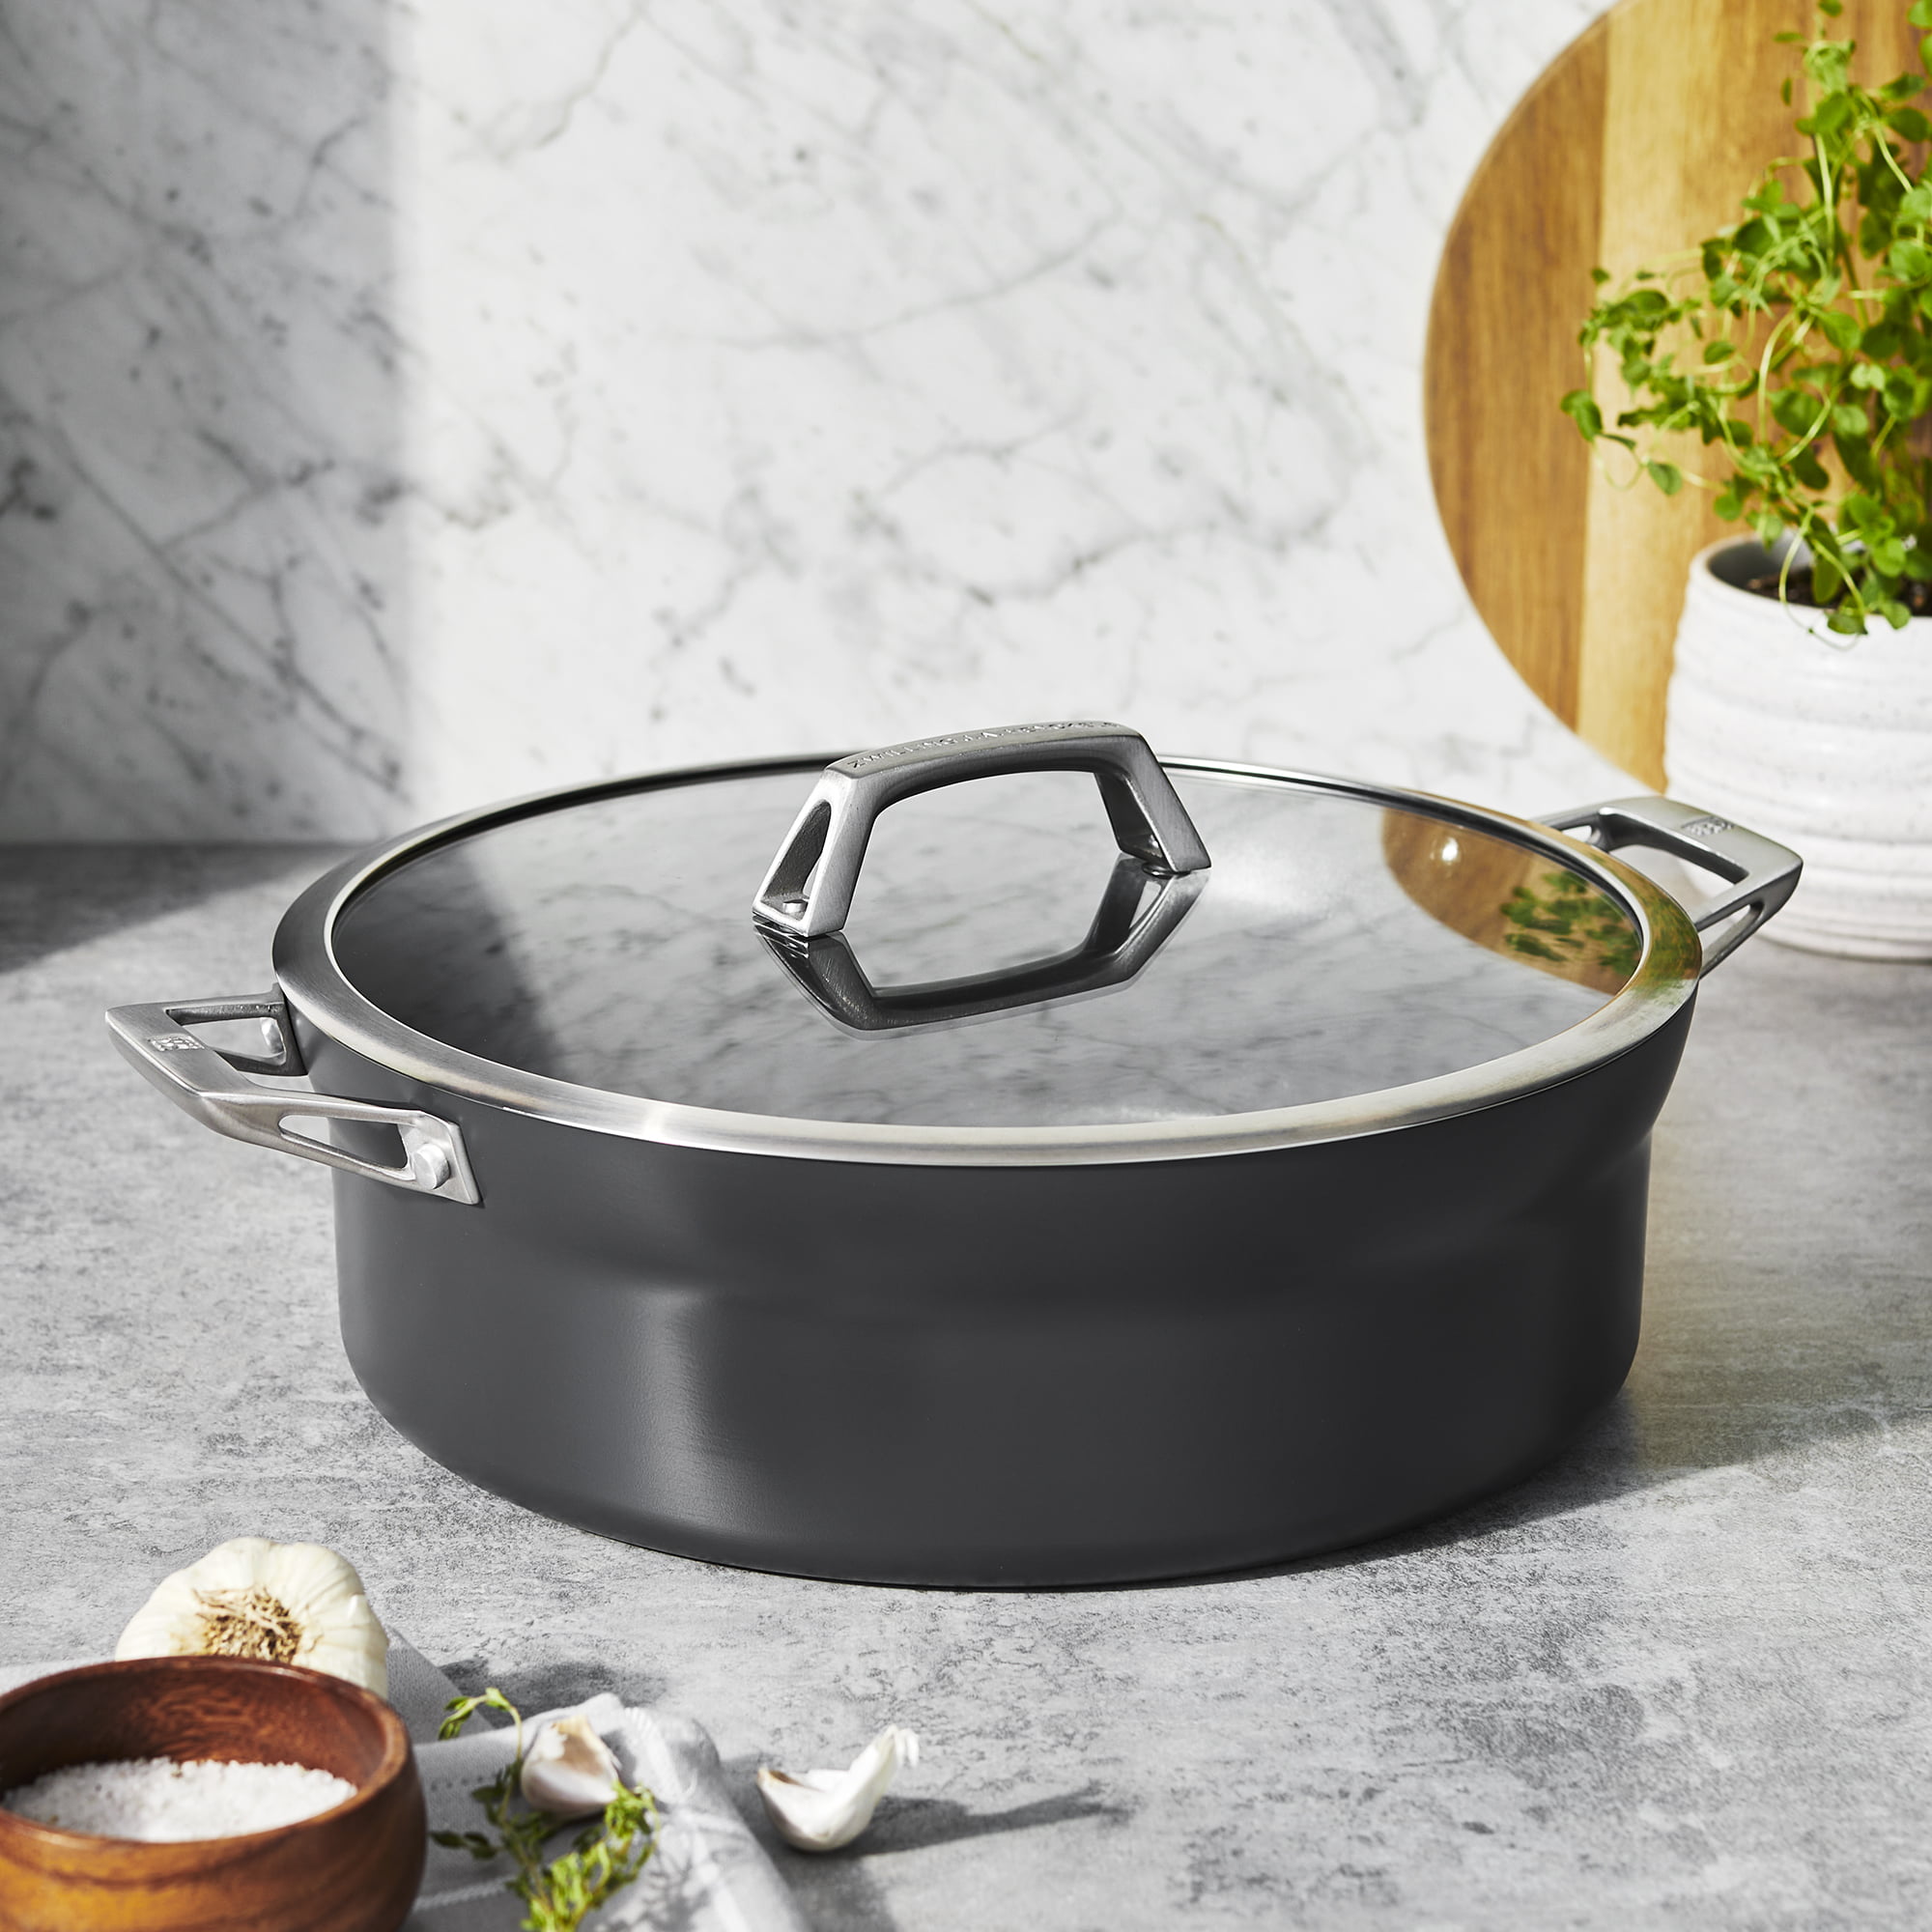 ZWILLING Motion 5-Qt. Non-Stick Hard-Anodized Dutch Oven + Reviews